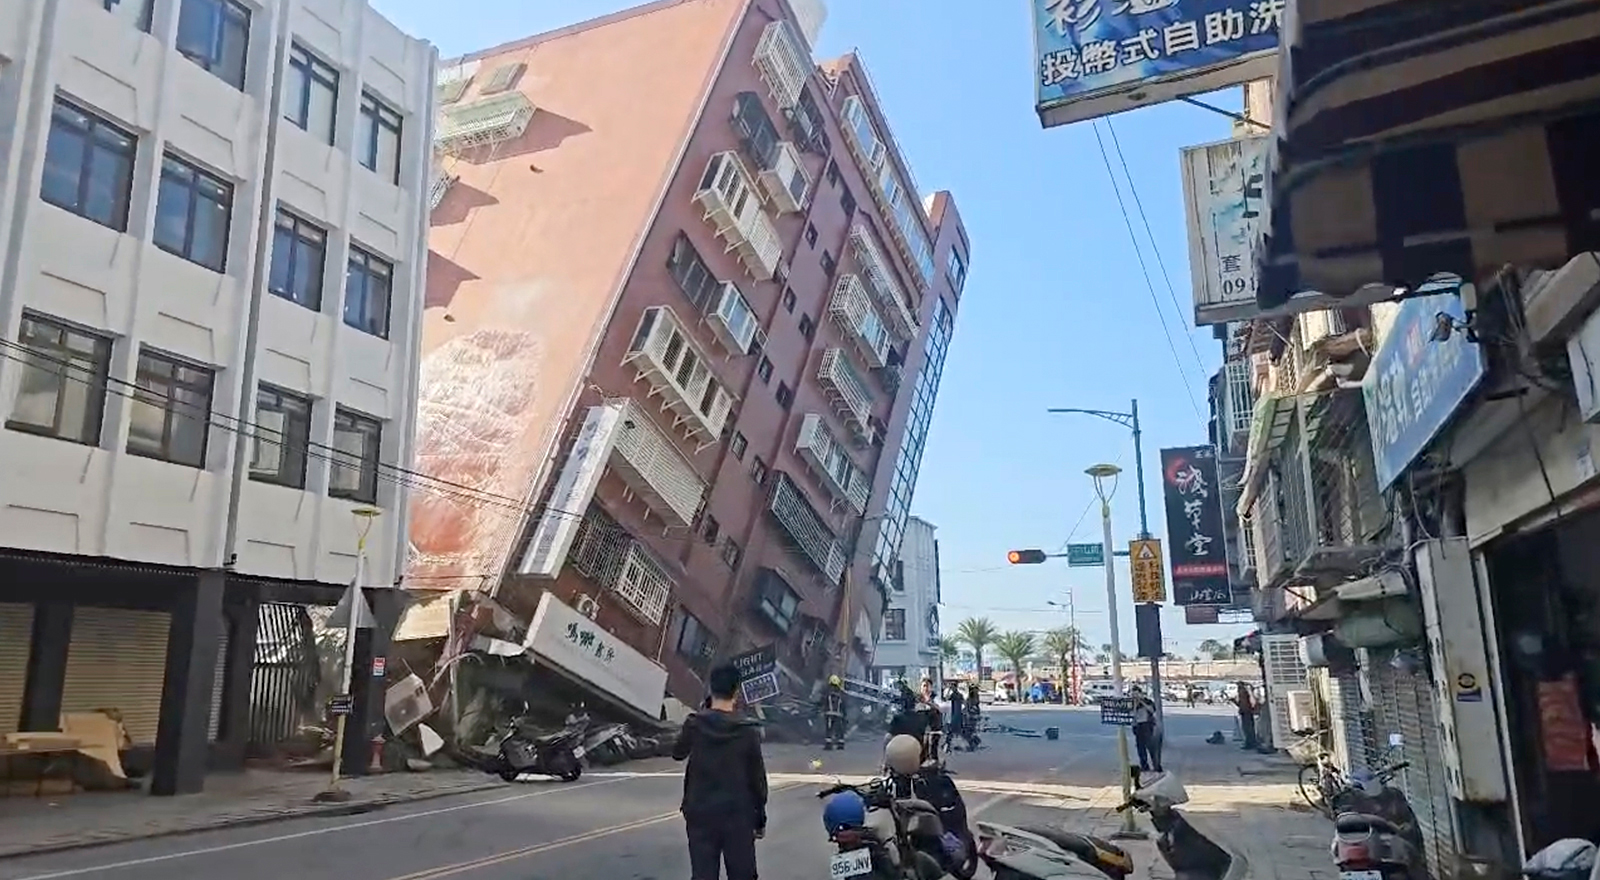 In this image taken from a video run by TVBS, a partially collapsed building is seen in Hualien, eastern Taiwan on Wednesday, April 3.